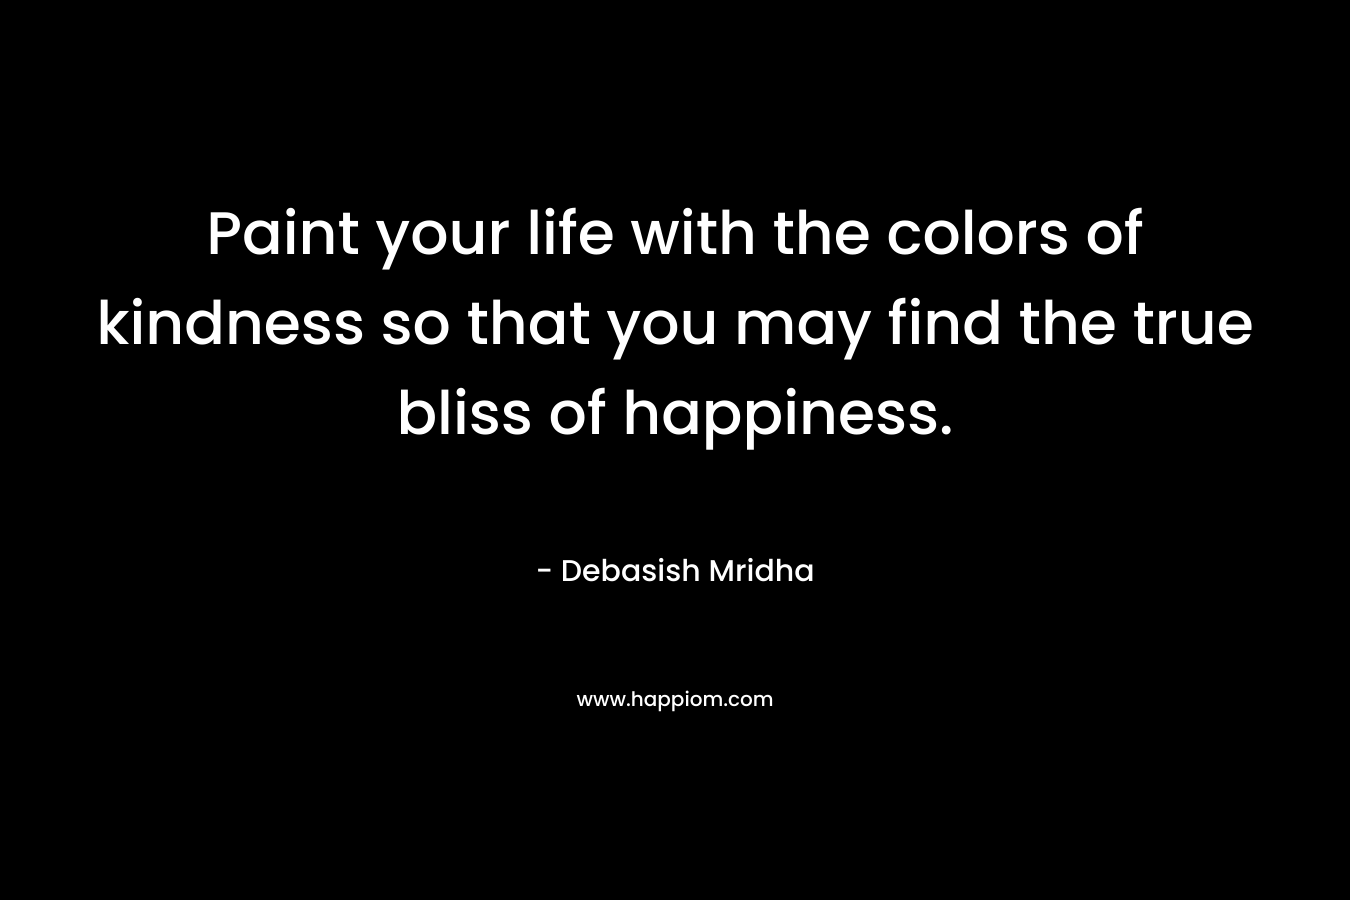 Paint your life with the colors of kindness so that you may find the true bliss of happiness.